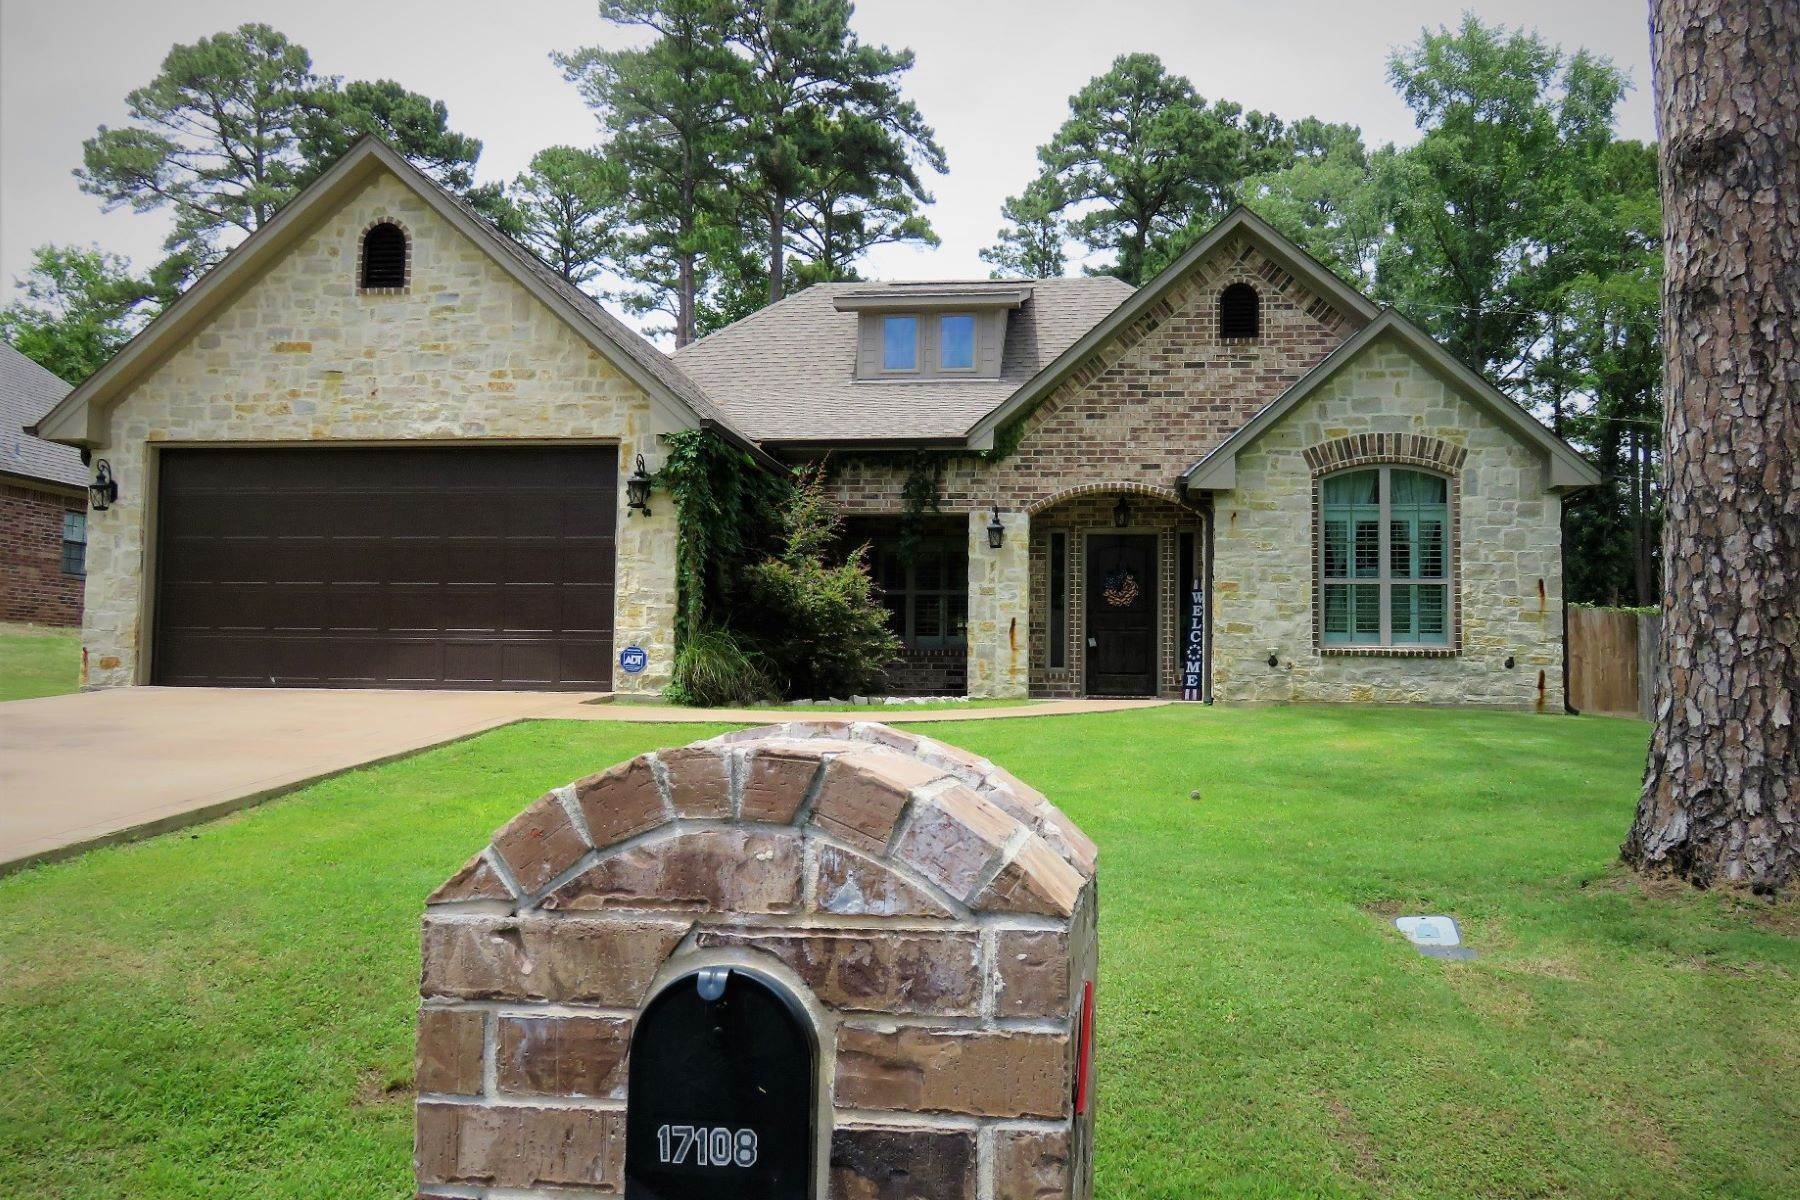 Single Family Homes for Sale at BEAUTIFUL BRICK & STONE HOME NEAR LAKE PALESTINE 17108 Mary Martin Dr Flint, Texas 75762 United States